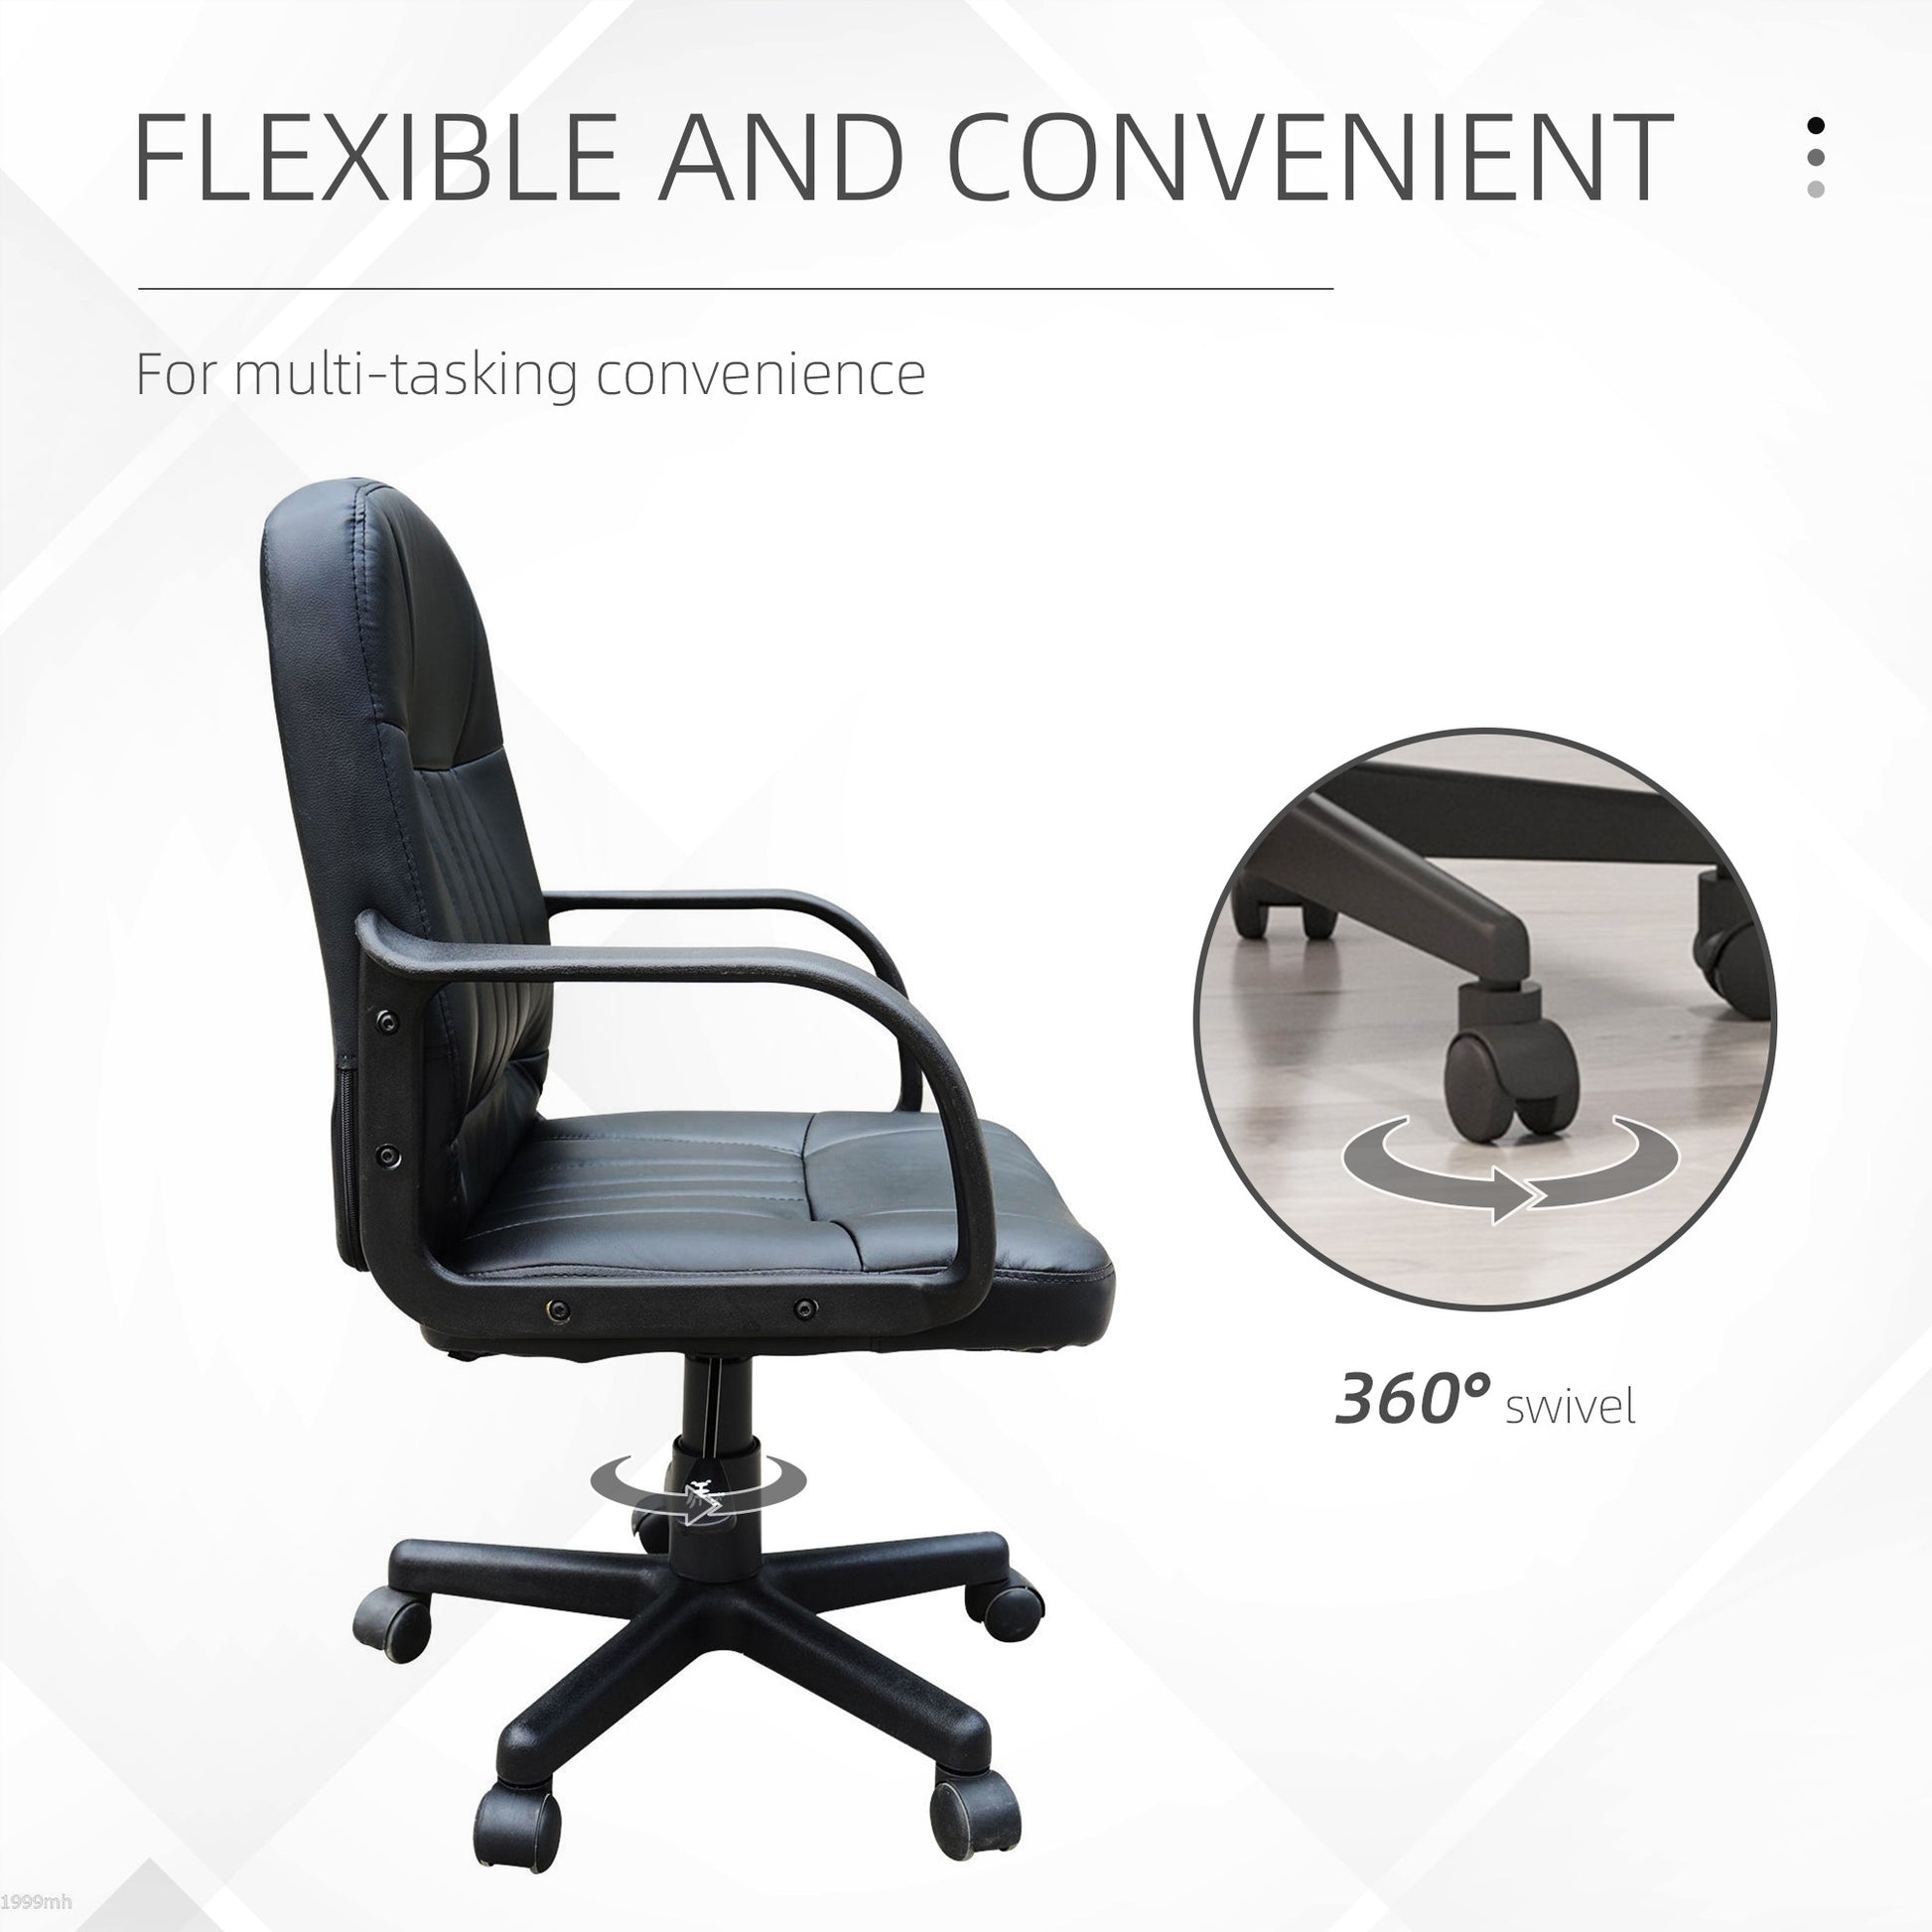 Swivel Executive Office Chair, PU Leather Desk Chair, Computer Chair, Gaming Seater, Black, HOMCOM, 5